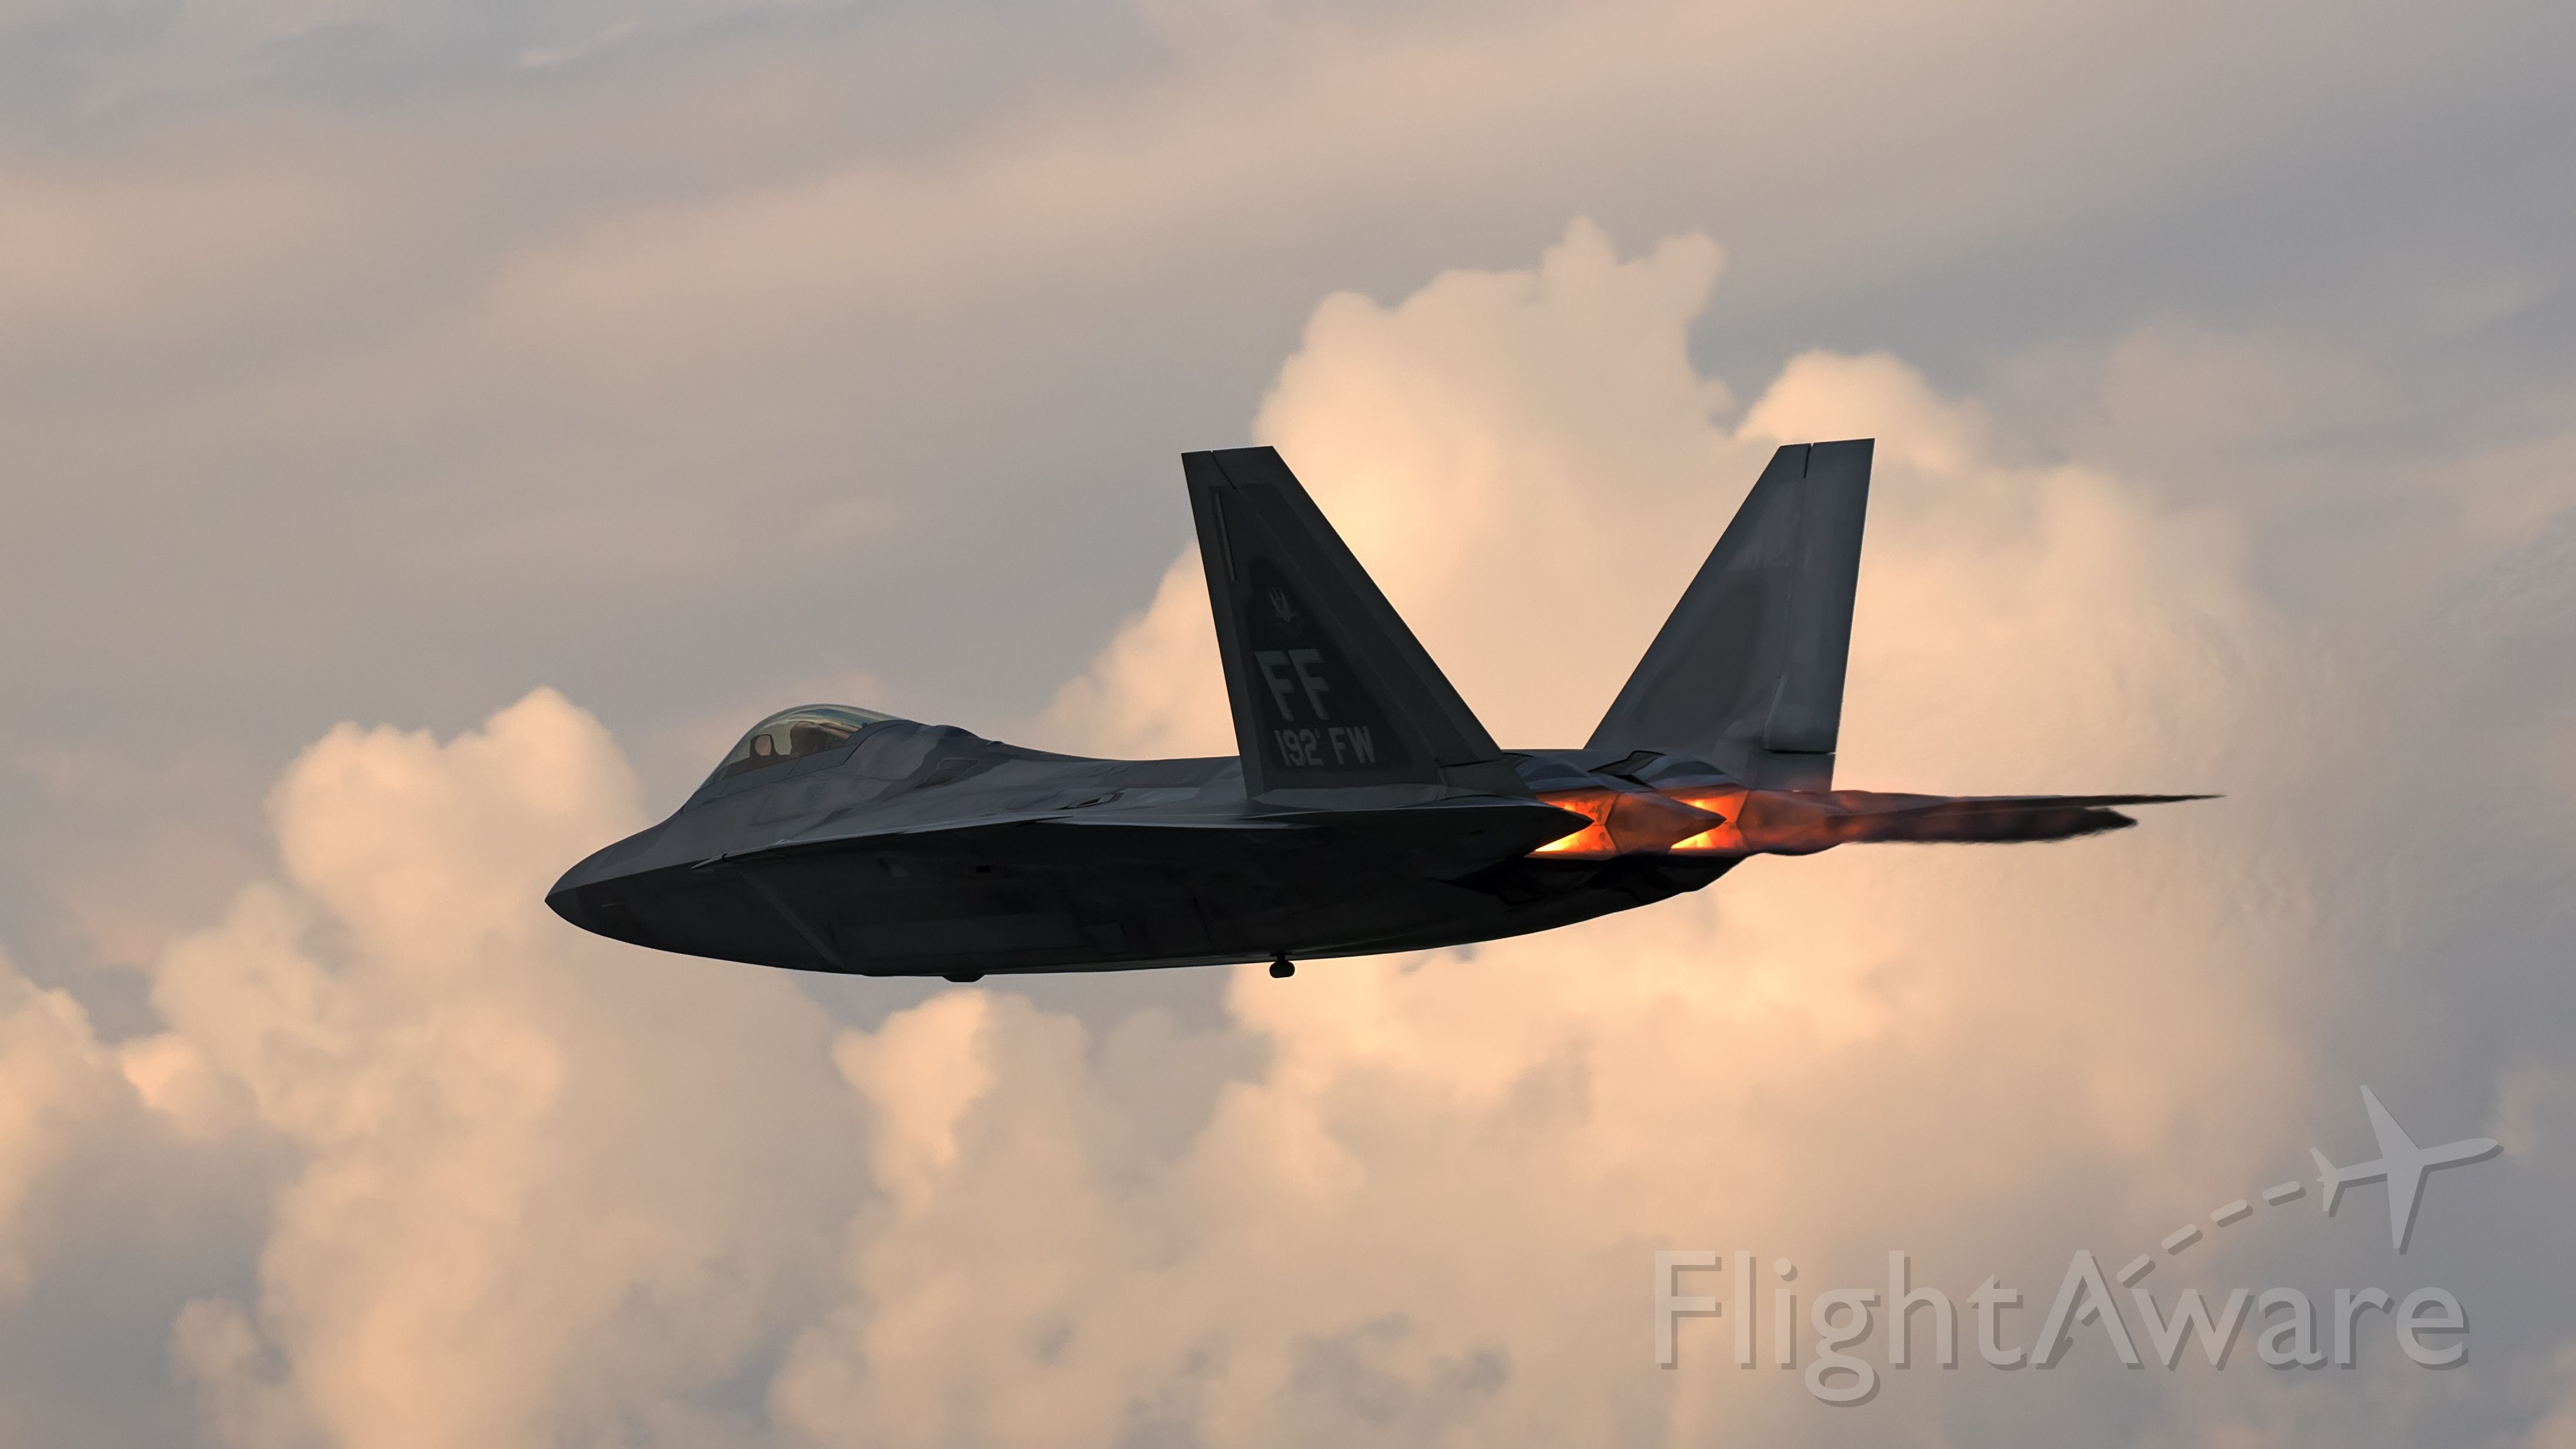 Lockheed F-22 Raptor — - F-22 Raptor taking off at sunset at the EAA